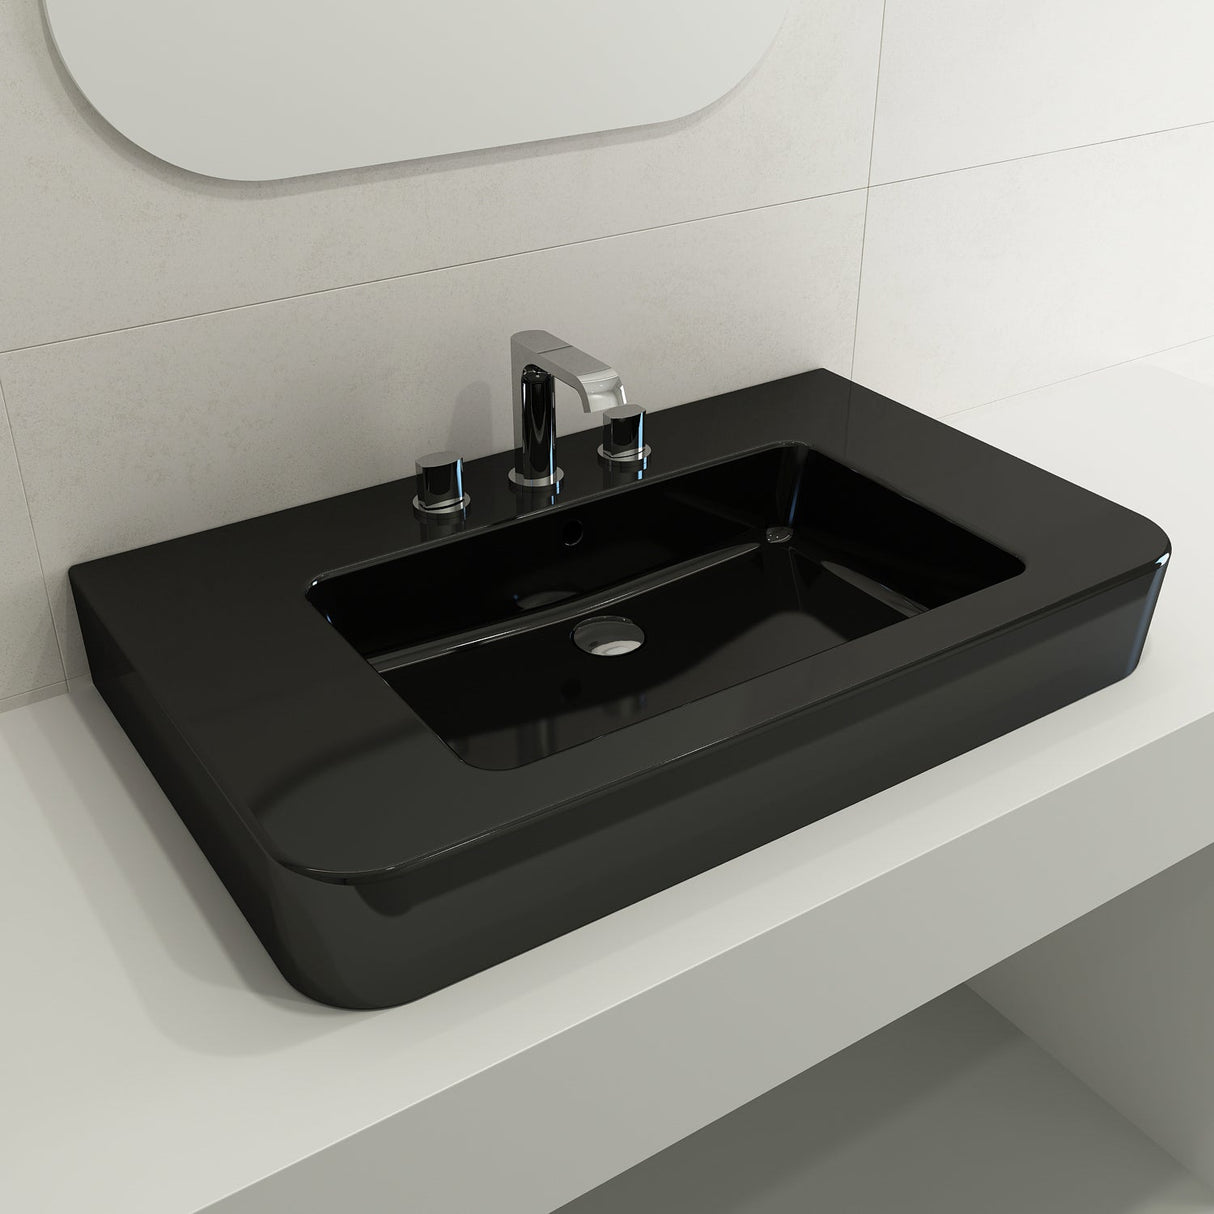 BOCCHI 1124-005-0127 Parma Wall-Mounted Sink Fireclay 33.5 in. 3-Hole with Overflow in Black